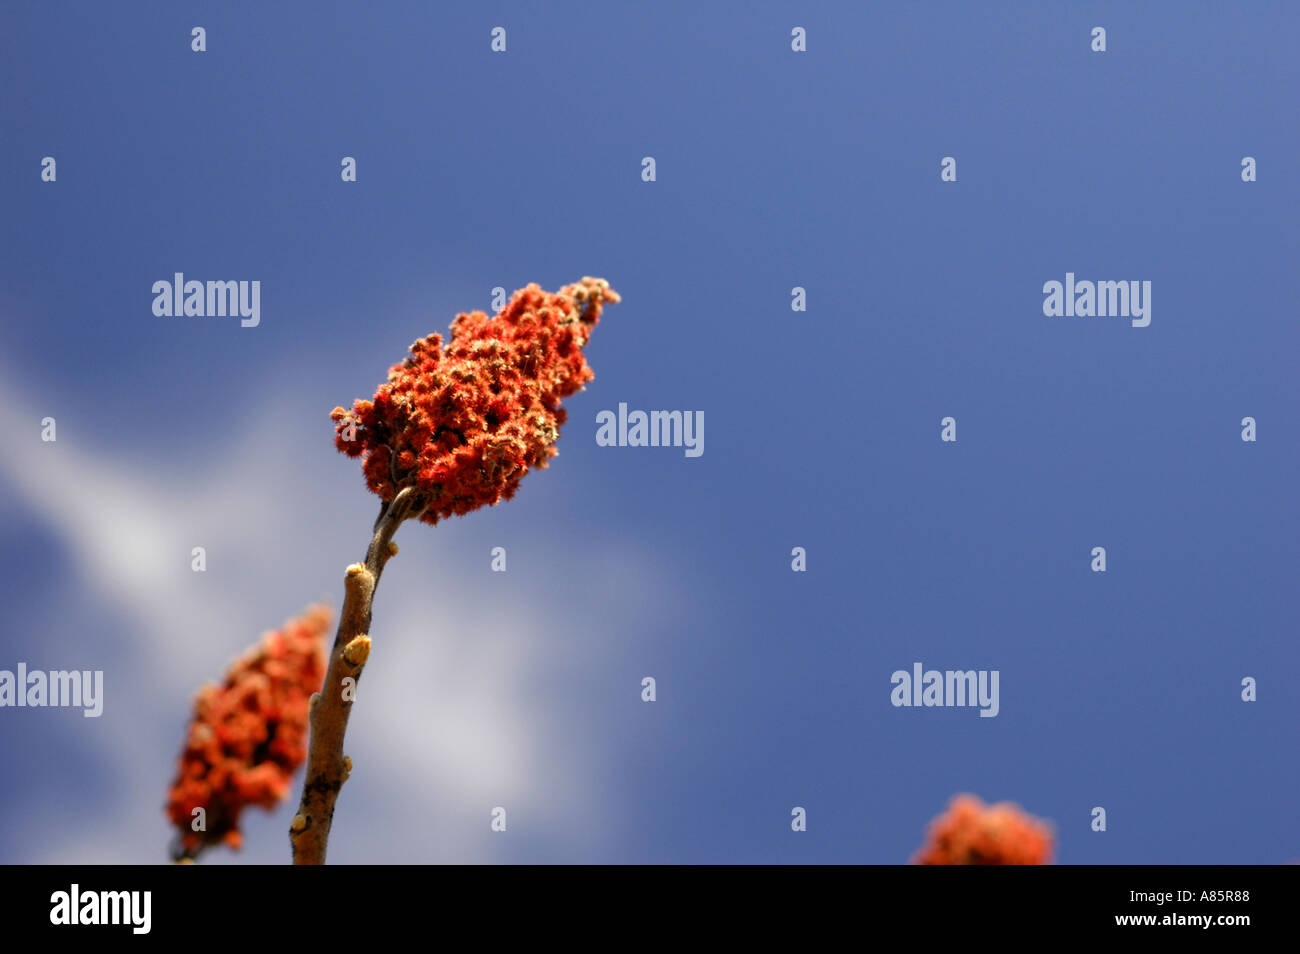 Staghorn Sumac rhus against a deep blue sky in Eastern Canada New Brunswick along the St John River Stock Photo